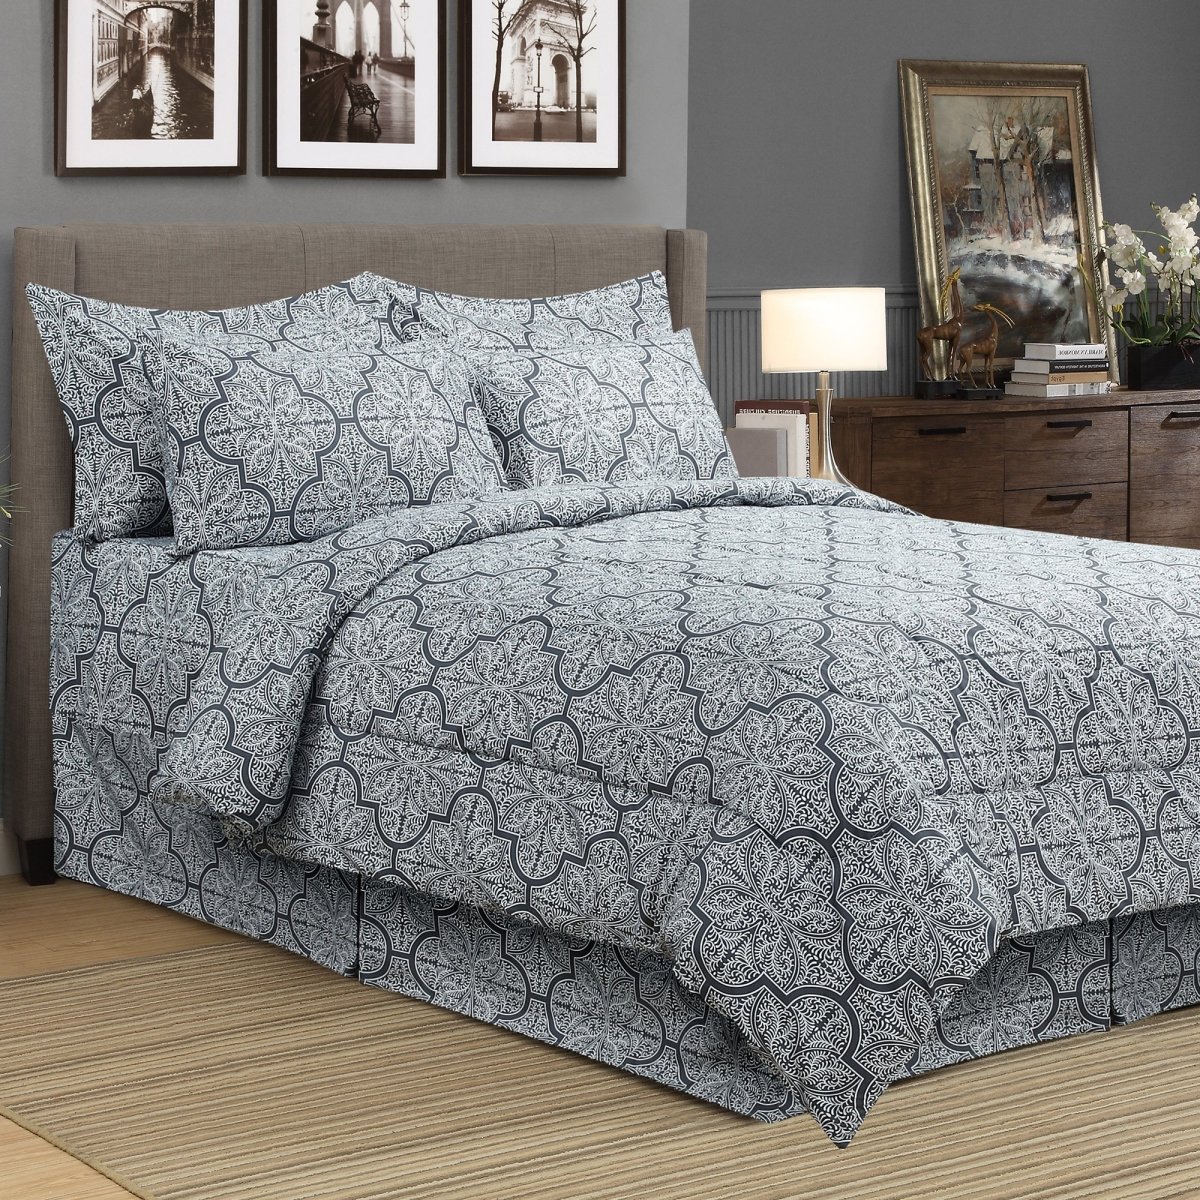 Sq-fe-dyngy-q08 8 Piece Dynasty Bed In A Bag Comforter Set, Grey - Queen Size